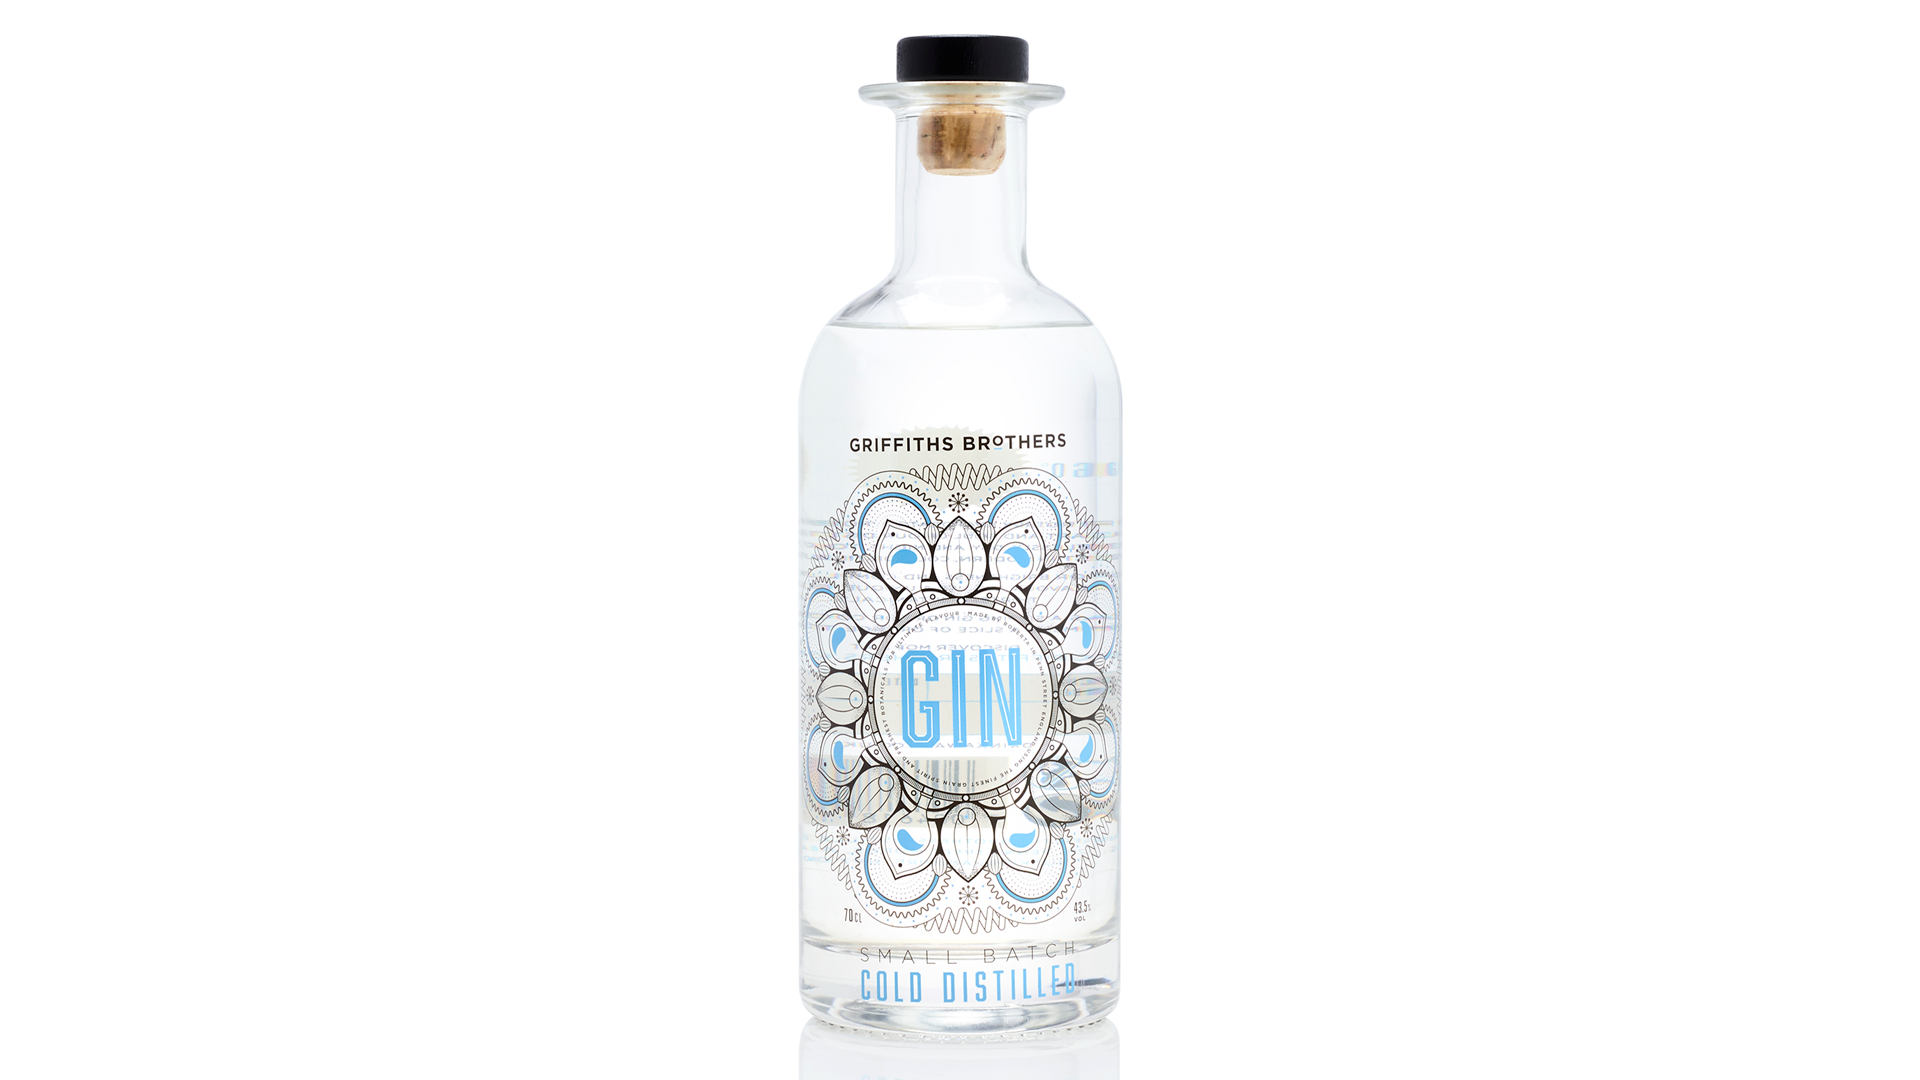 Griffiths Brothers Gin Label - PaperSpecs